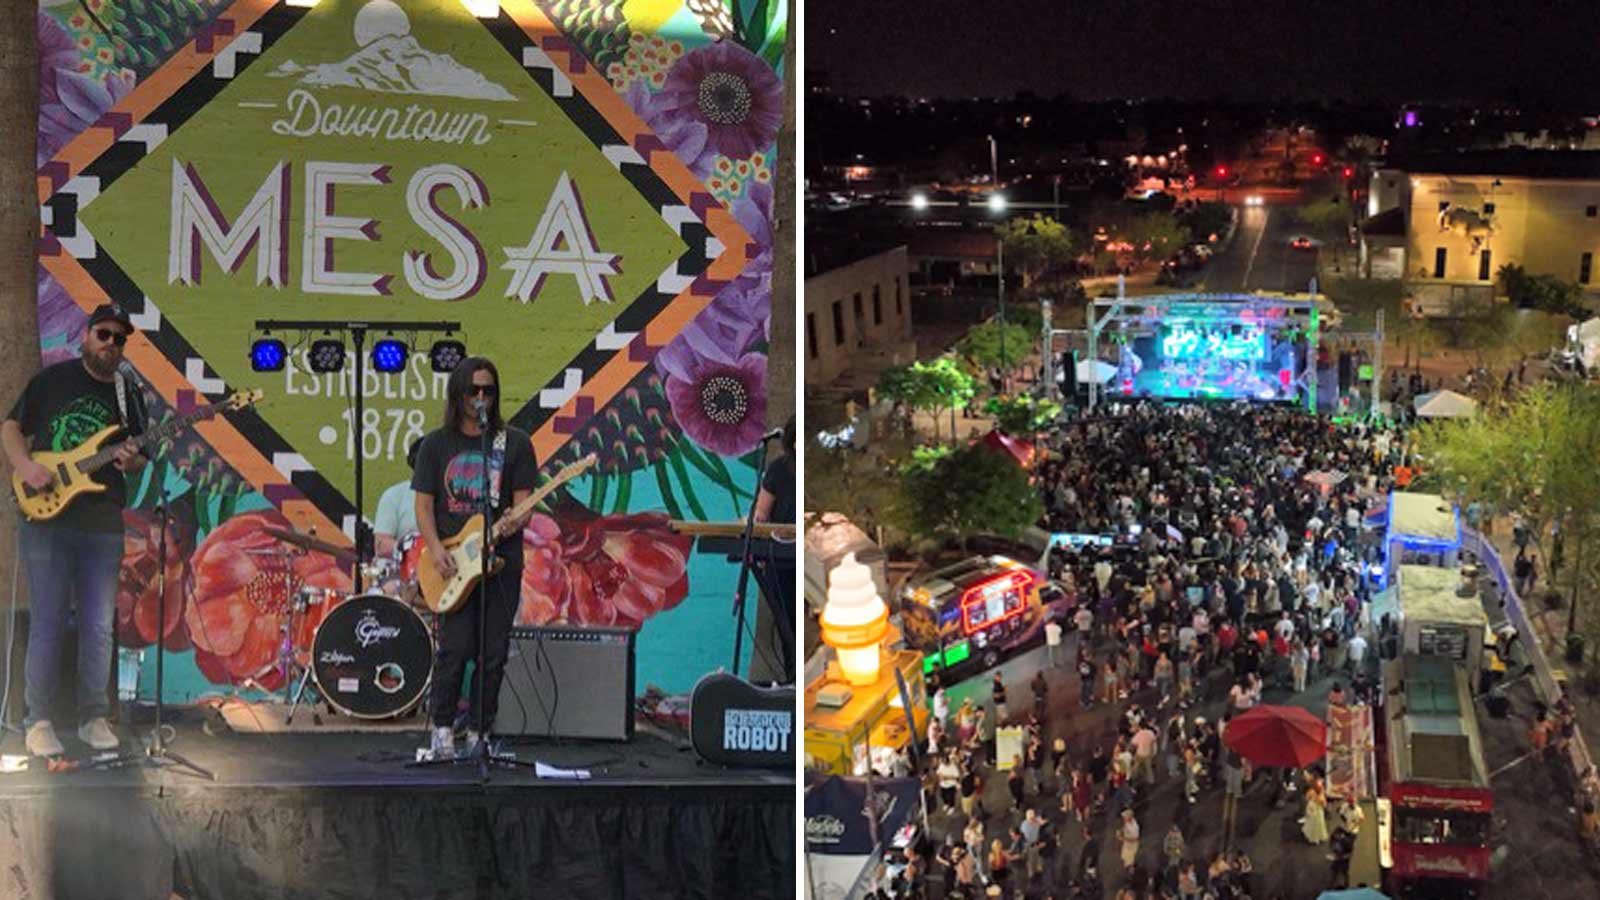 Split image with a band playing in front of a Mesa mural on the left and an aerial view of the Mesa Music Festival on the right